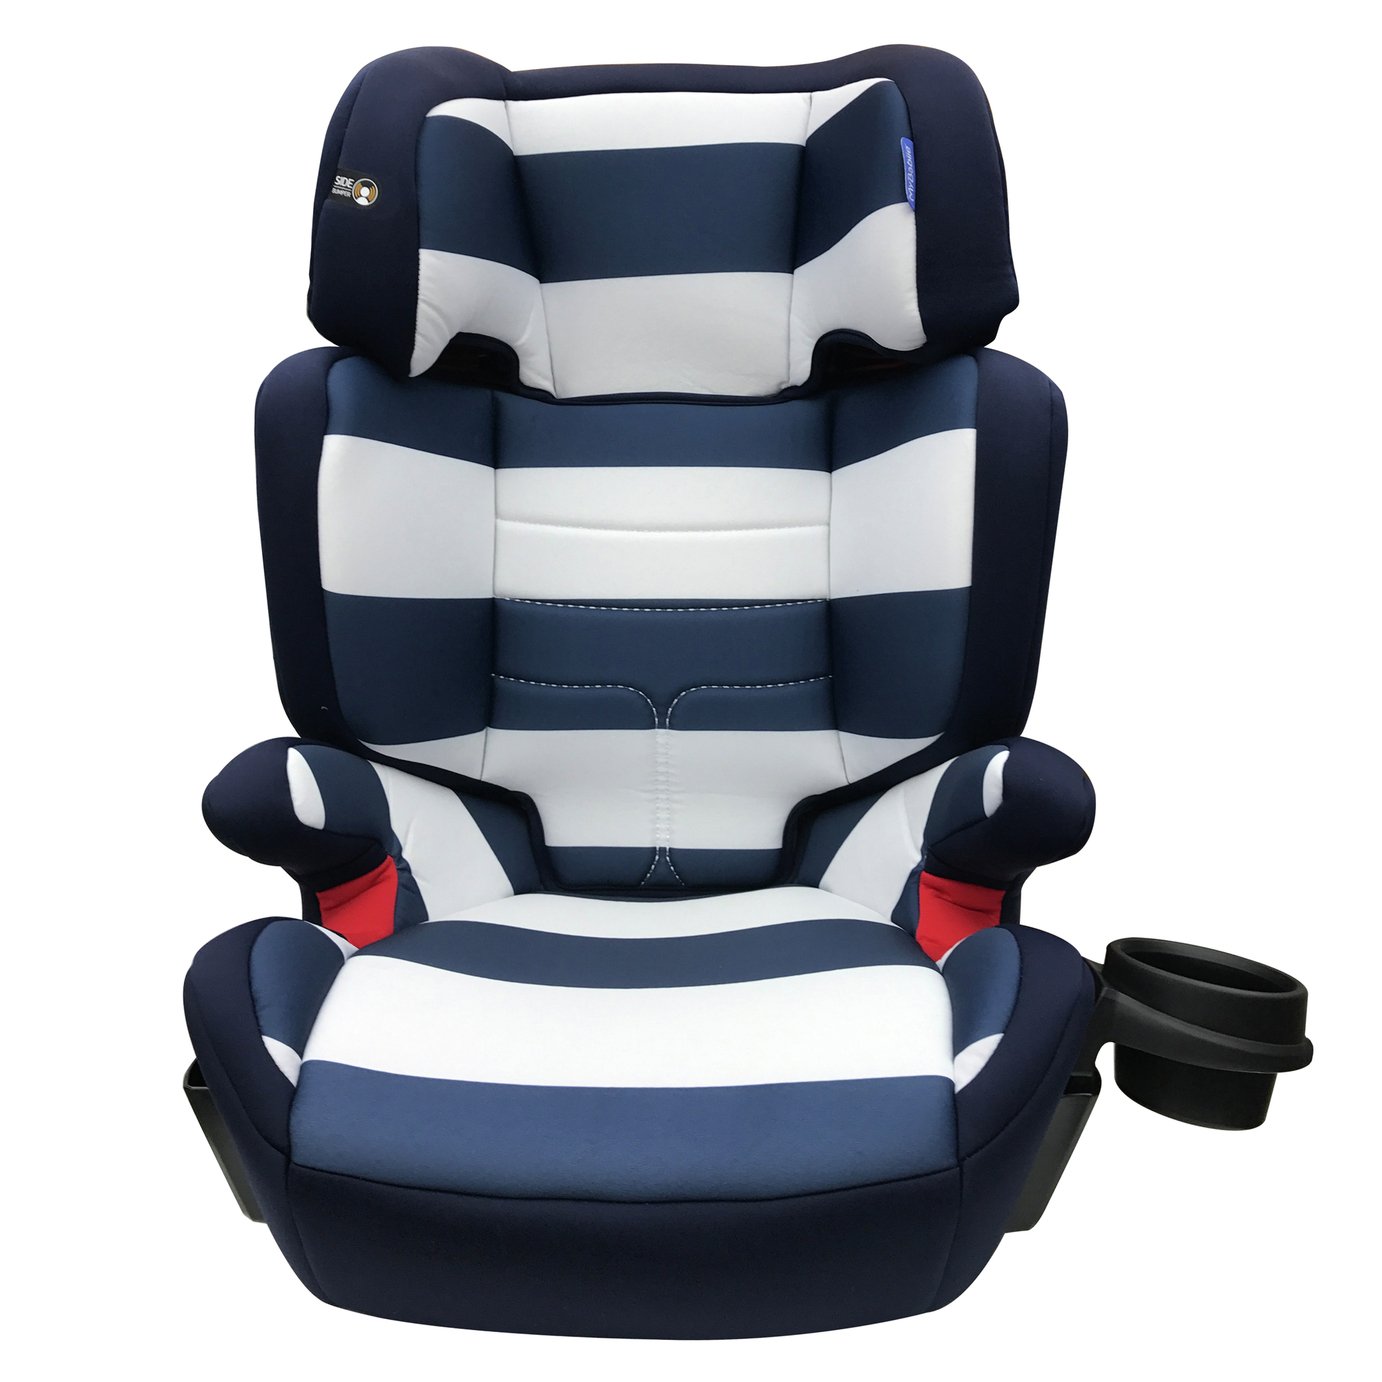 My Babiie Group 2/3 Car Seat Review